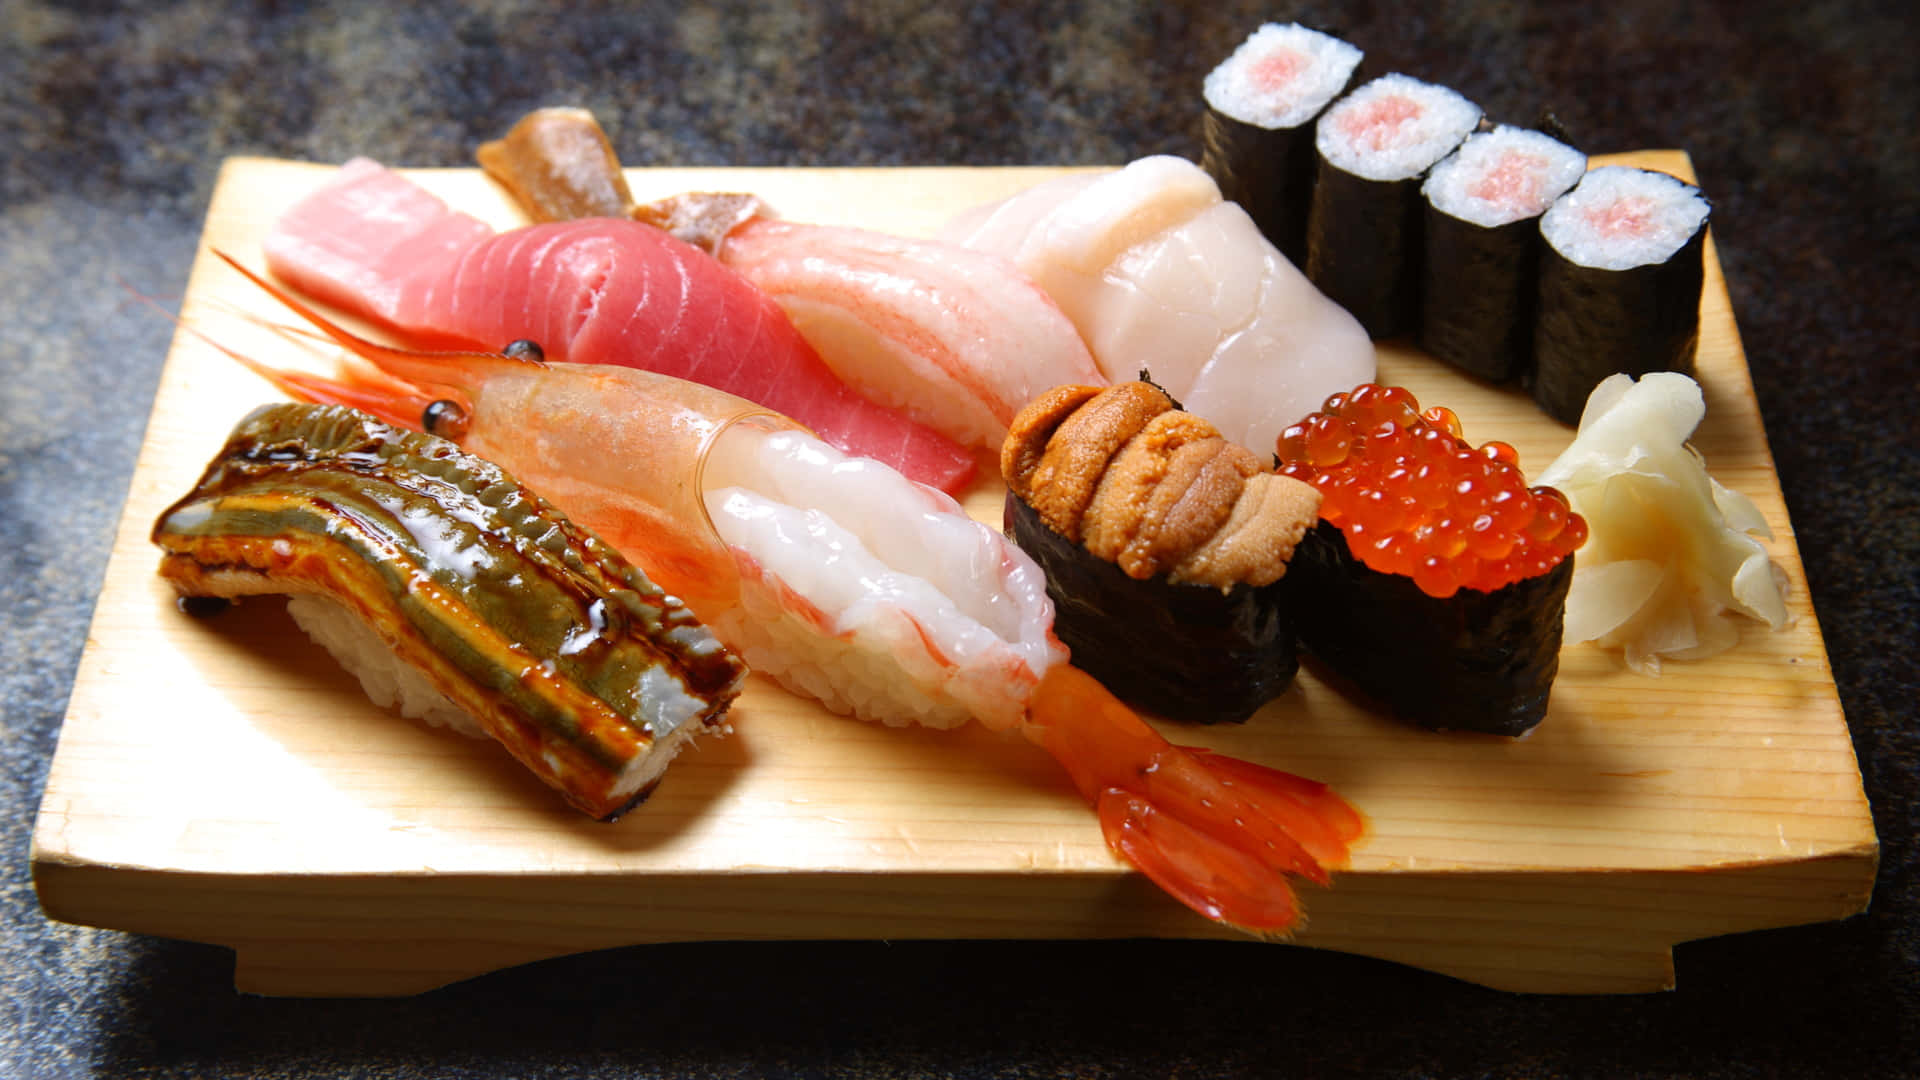 Mouthwatering Assortment of Sushi on a Wooden Platter